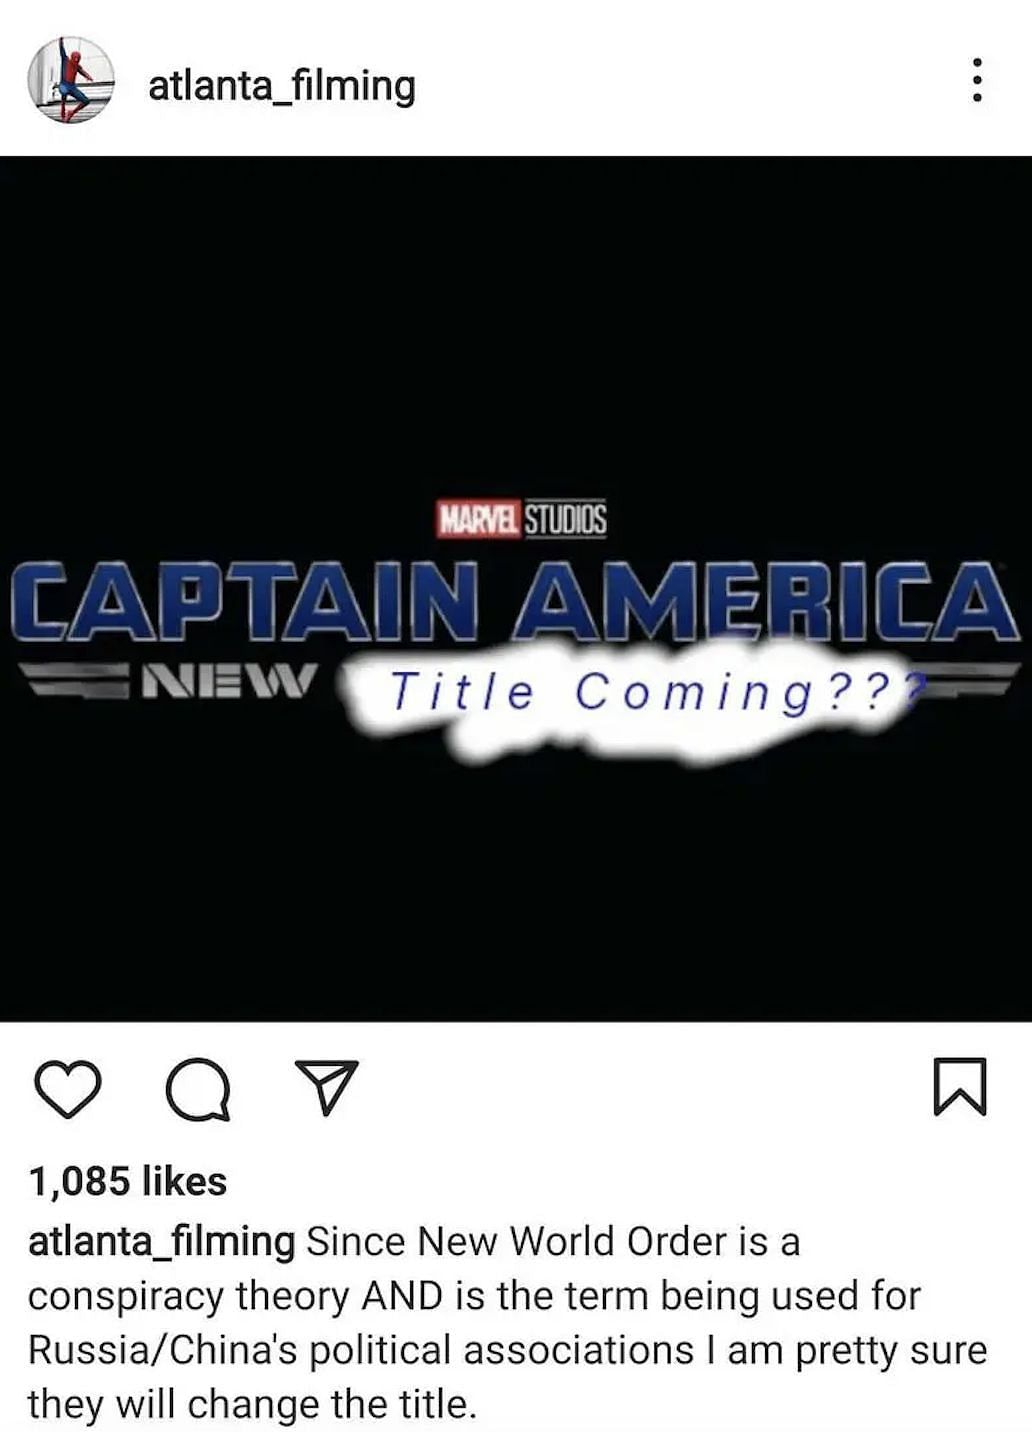 Geopolitical events involving Russia and China may prompt a title change for Captain America: New World Order, according to a March 21 Instagram post (Image via Atlanta Filming&#039;s Instagram)